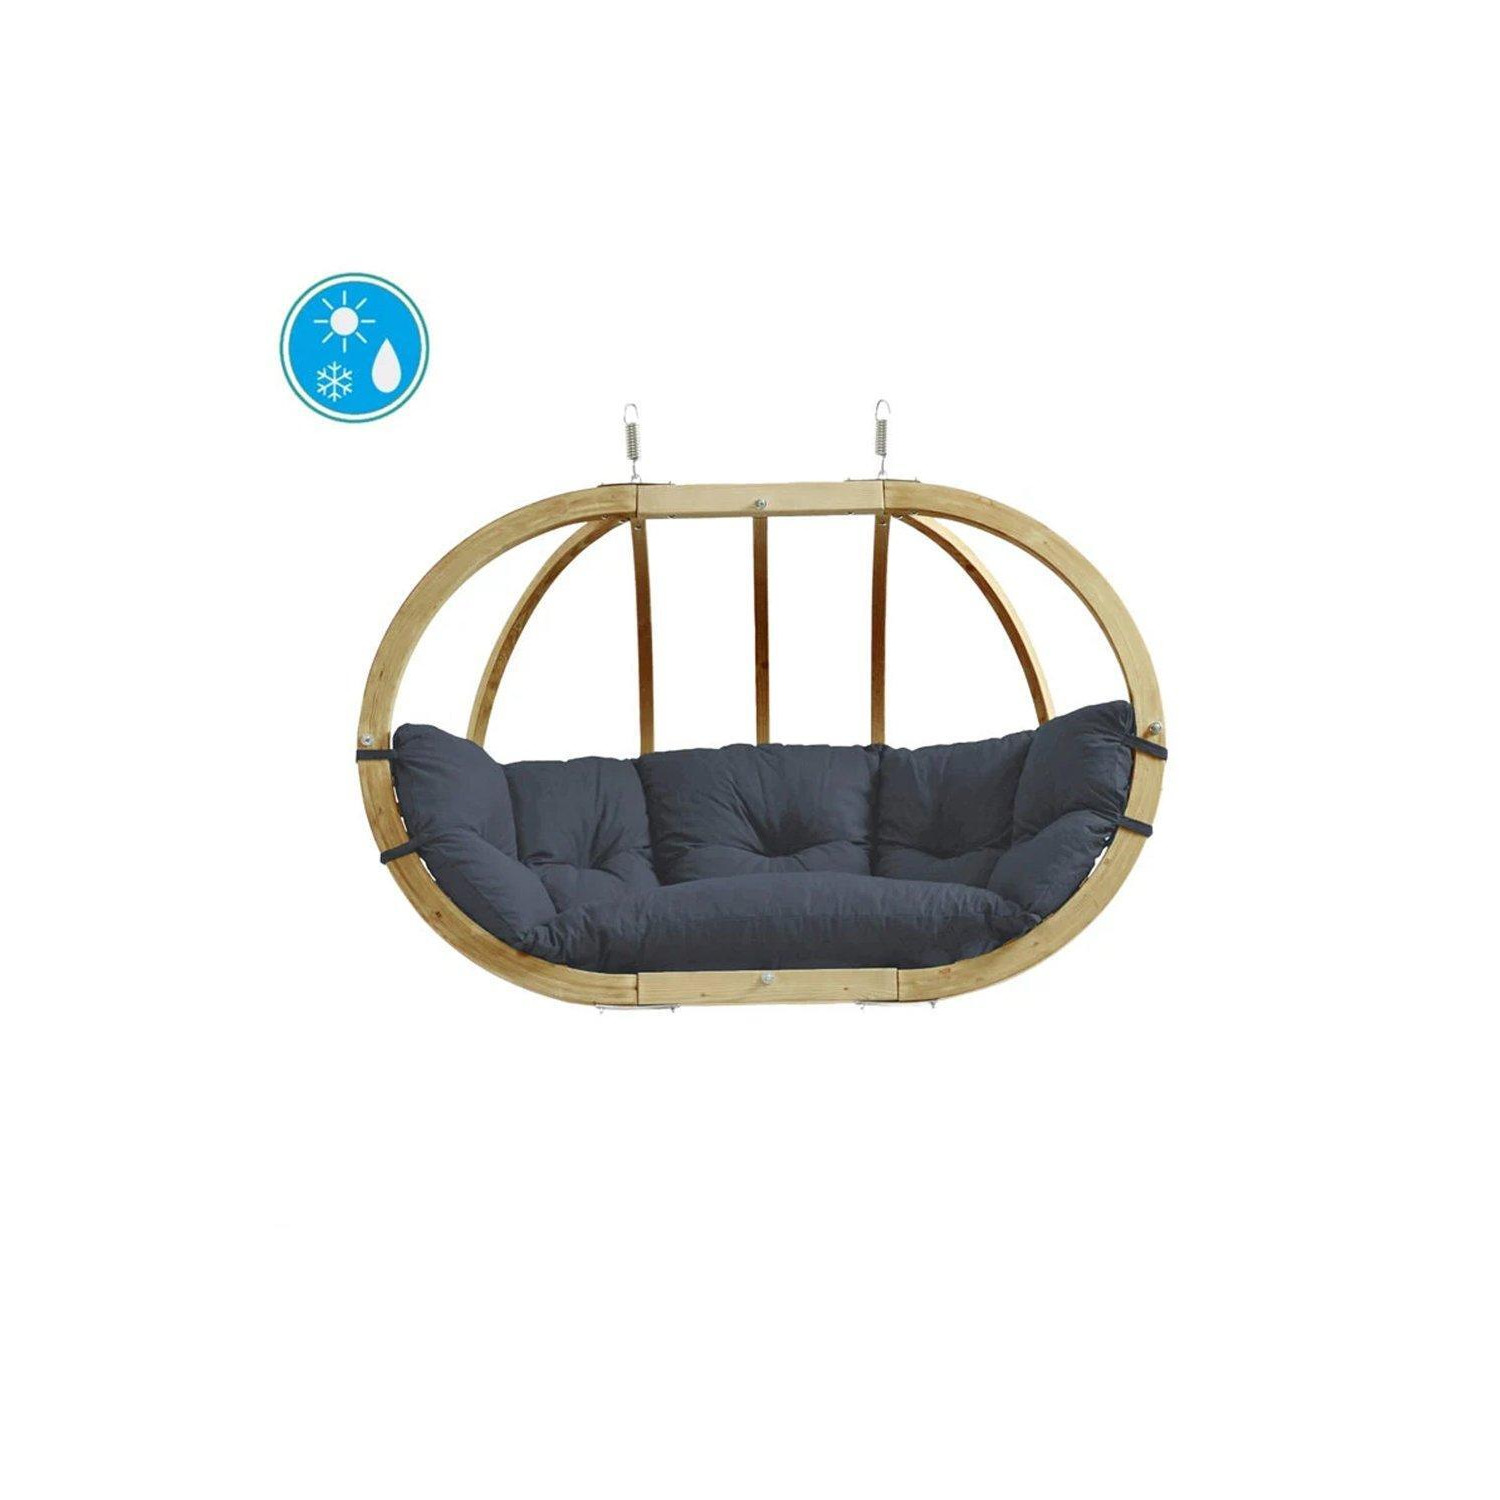 Globo Double Royal Wooden Cushion Egg Hanging Chair - Anthracite - image 1